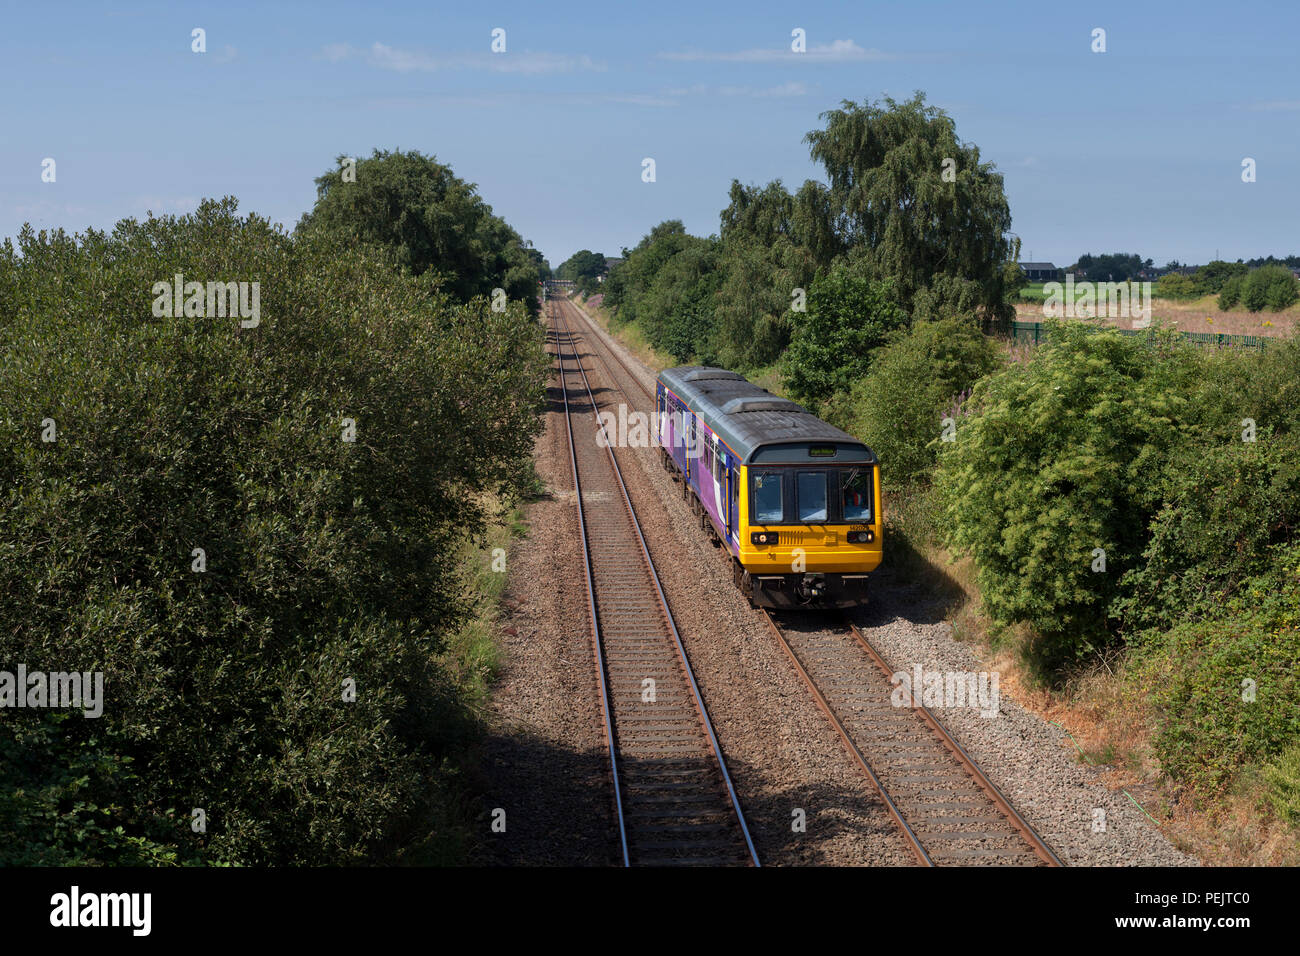 Northern rail class 142 pacer train at  Rainford on the Kirkby to Wigan railway line Stock Photo